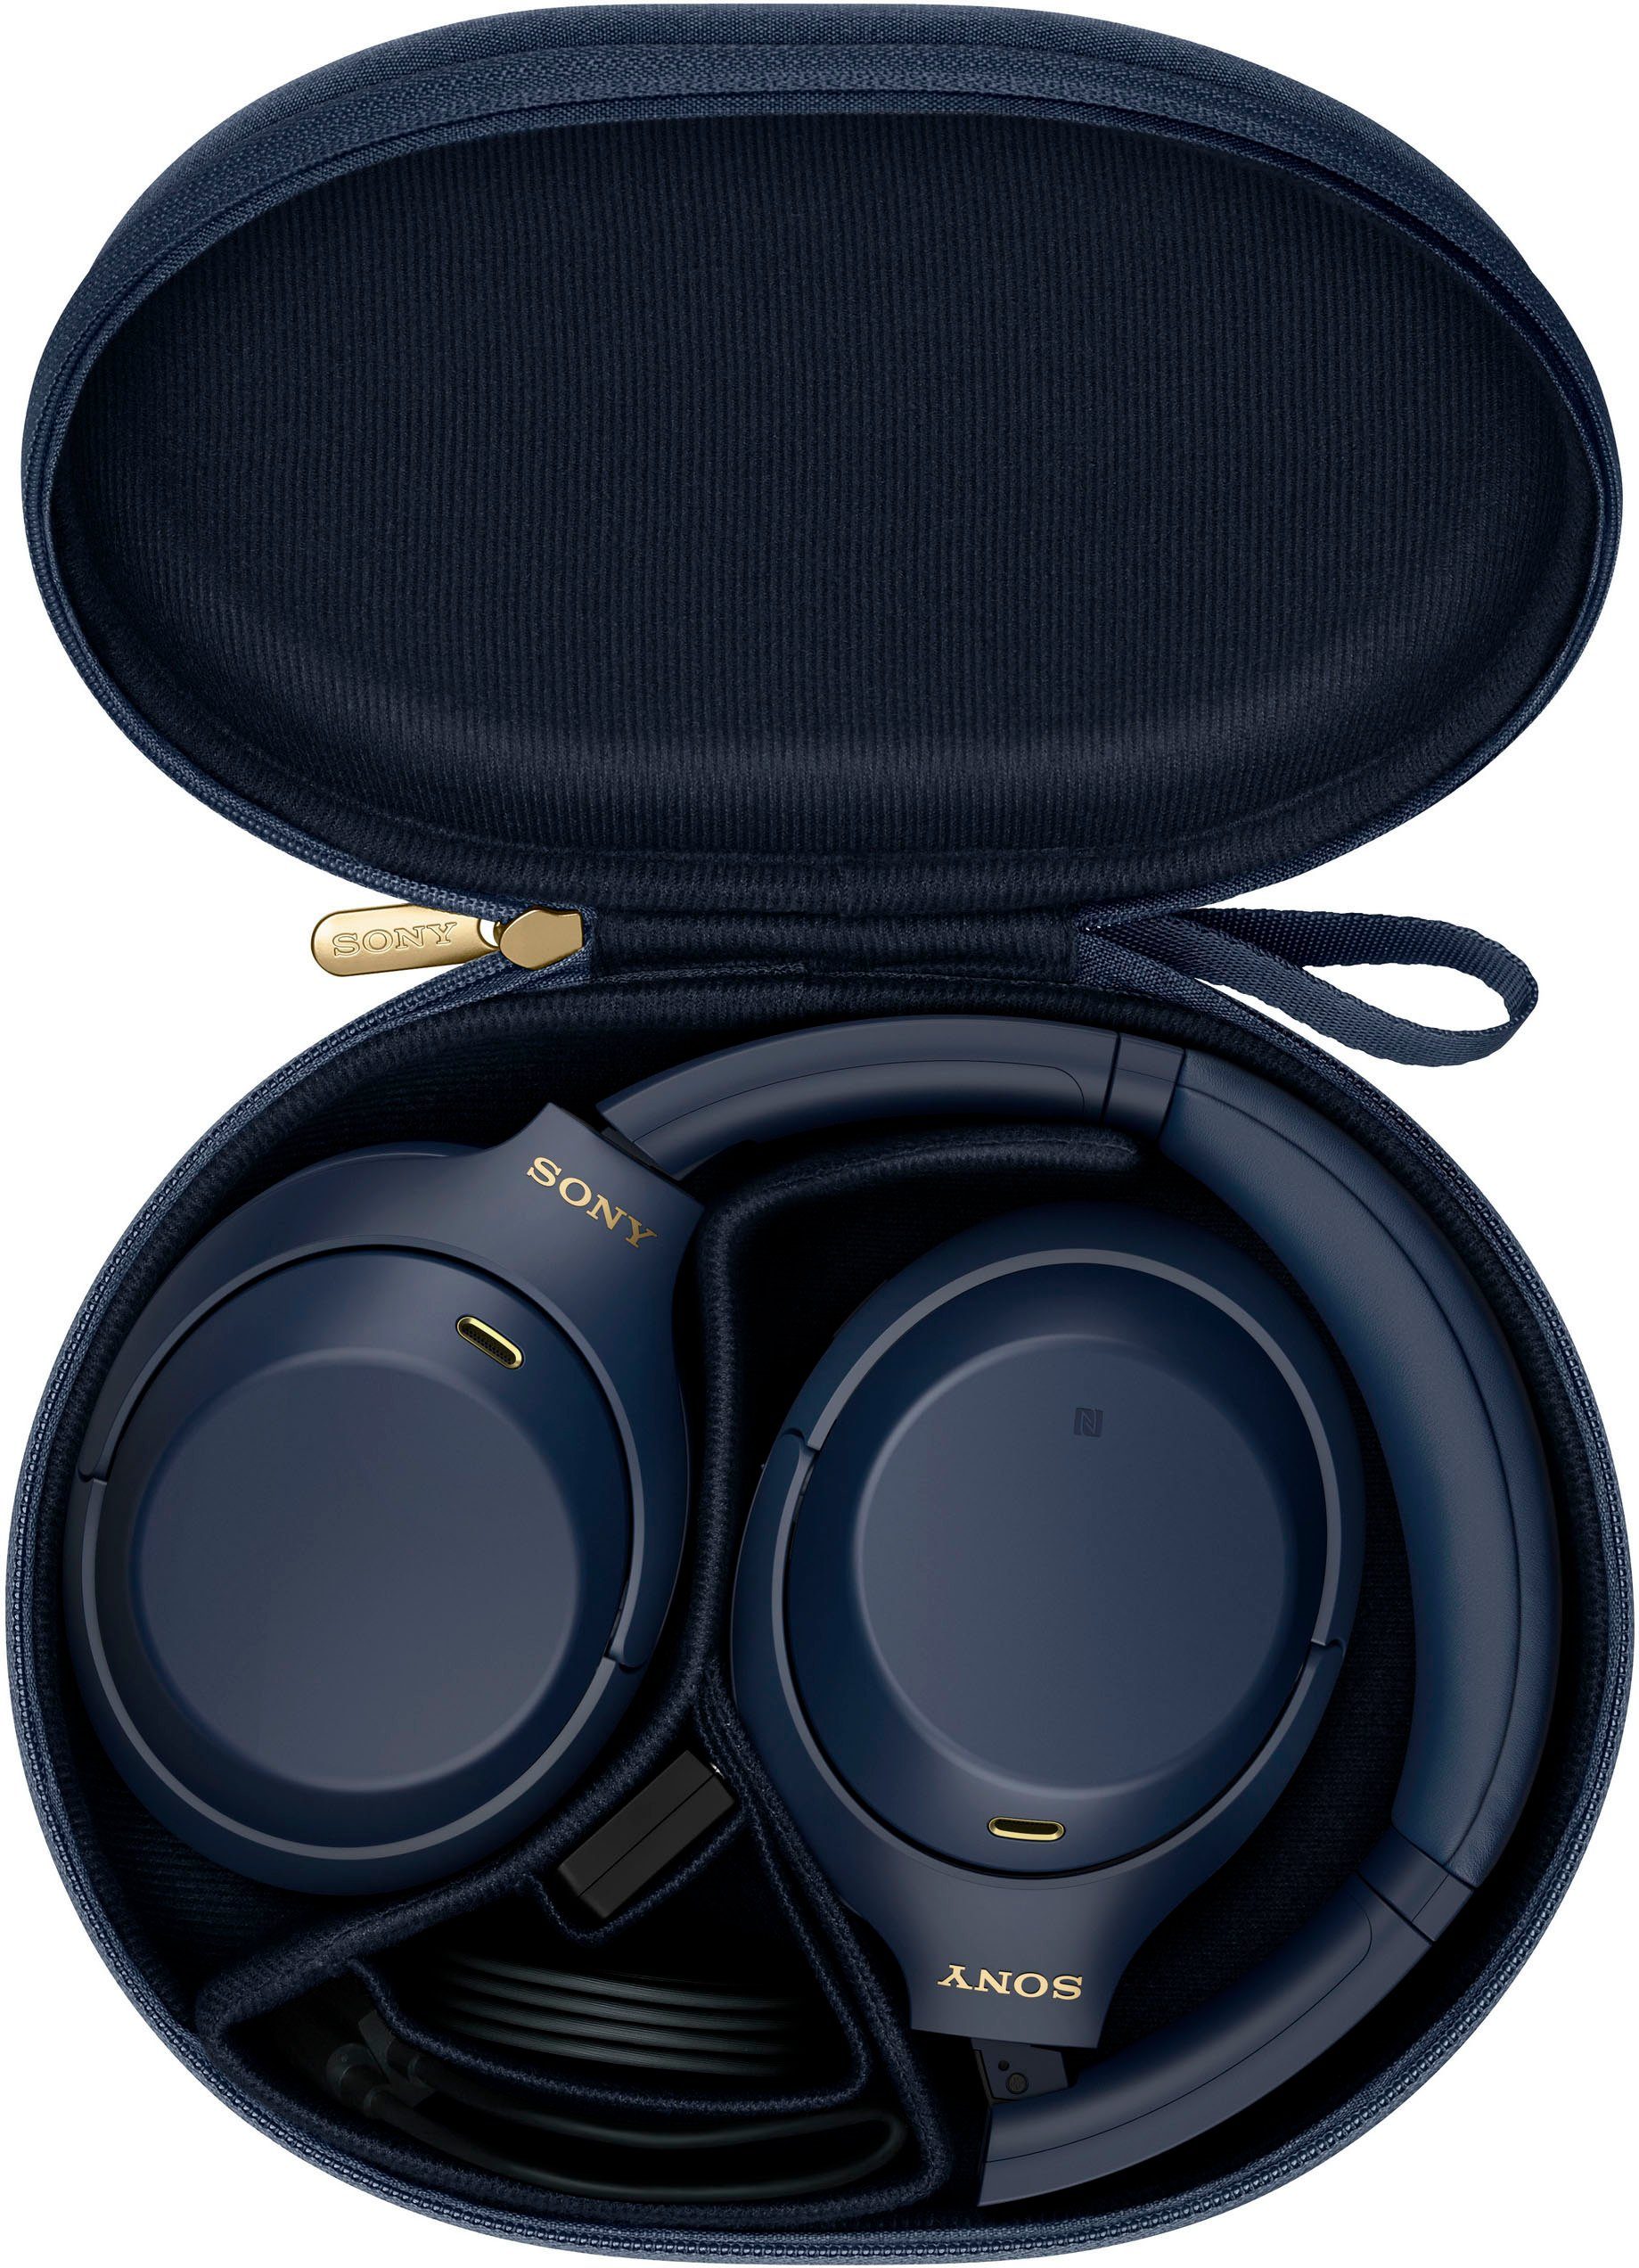 Sony WH-1000XM4 kabelloser Sensor, NFC, via Over-Ear-Kopfhörer NFC, blau Bluetooth, Touch (Noise-Cancelling, Verbindung One-Touch Schnellladefunktion)